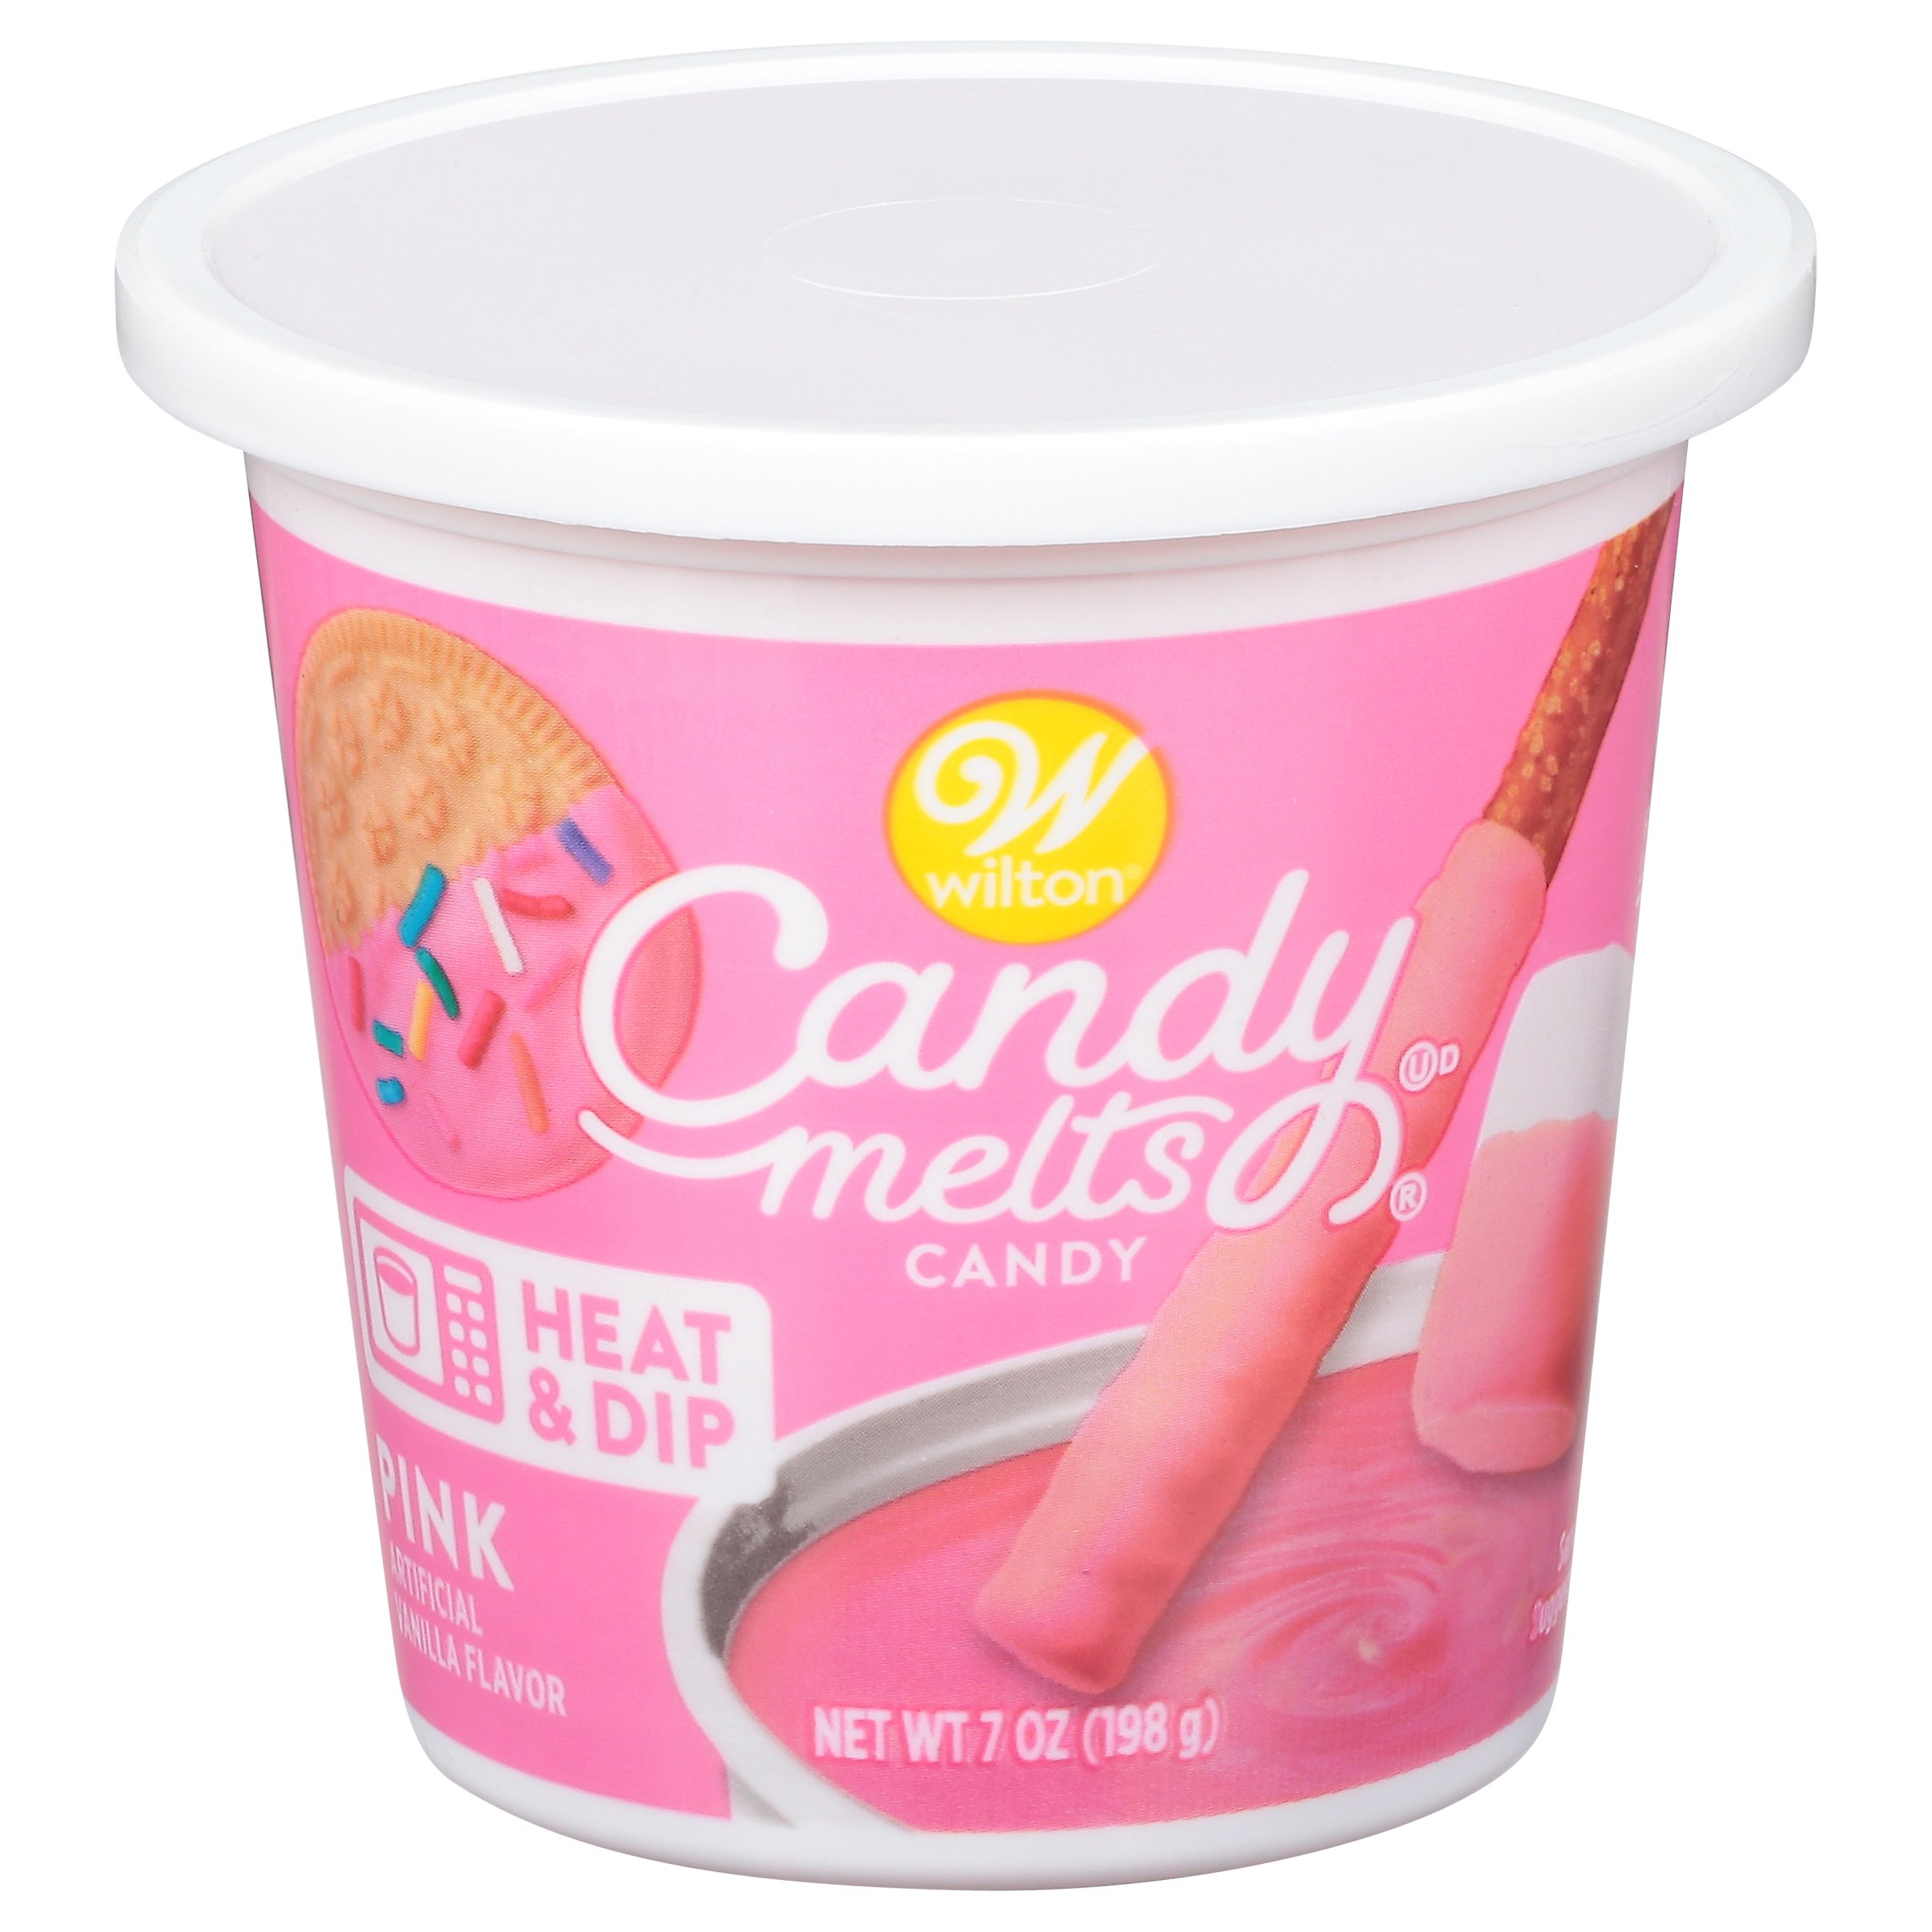 Wilton Pink Candy Melts - Shop Baking Chocolate & Candies at H-E-B